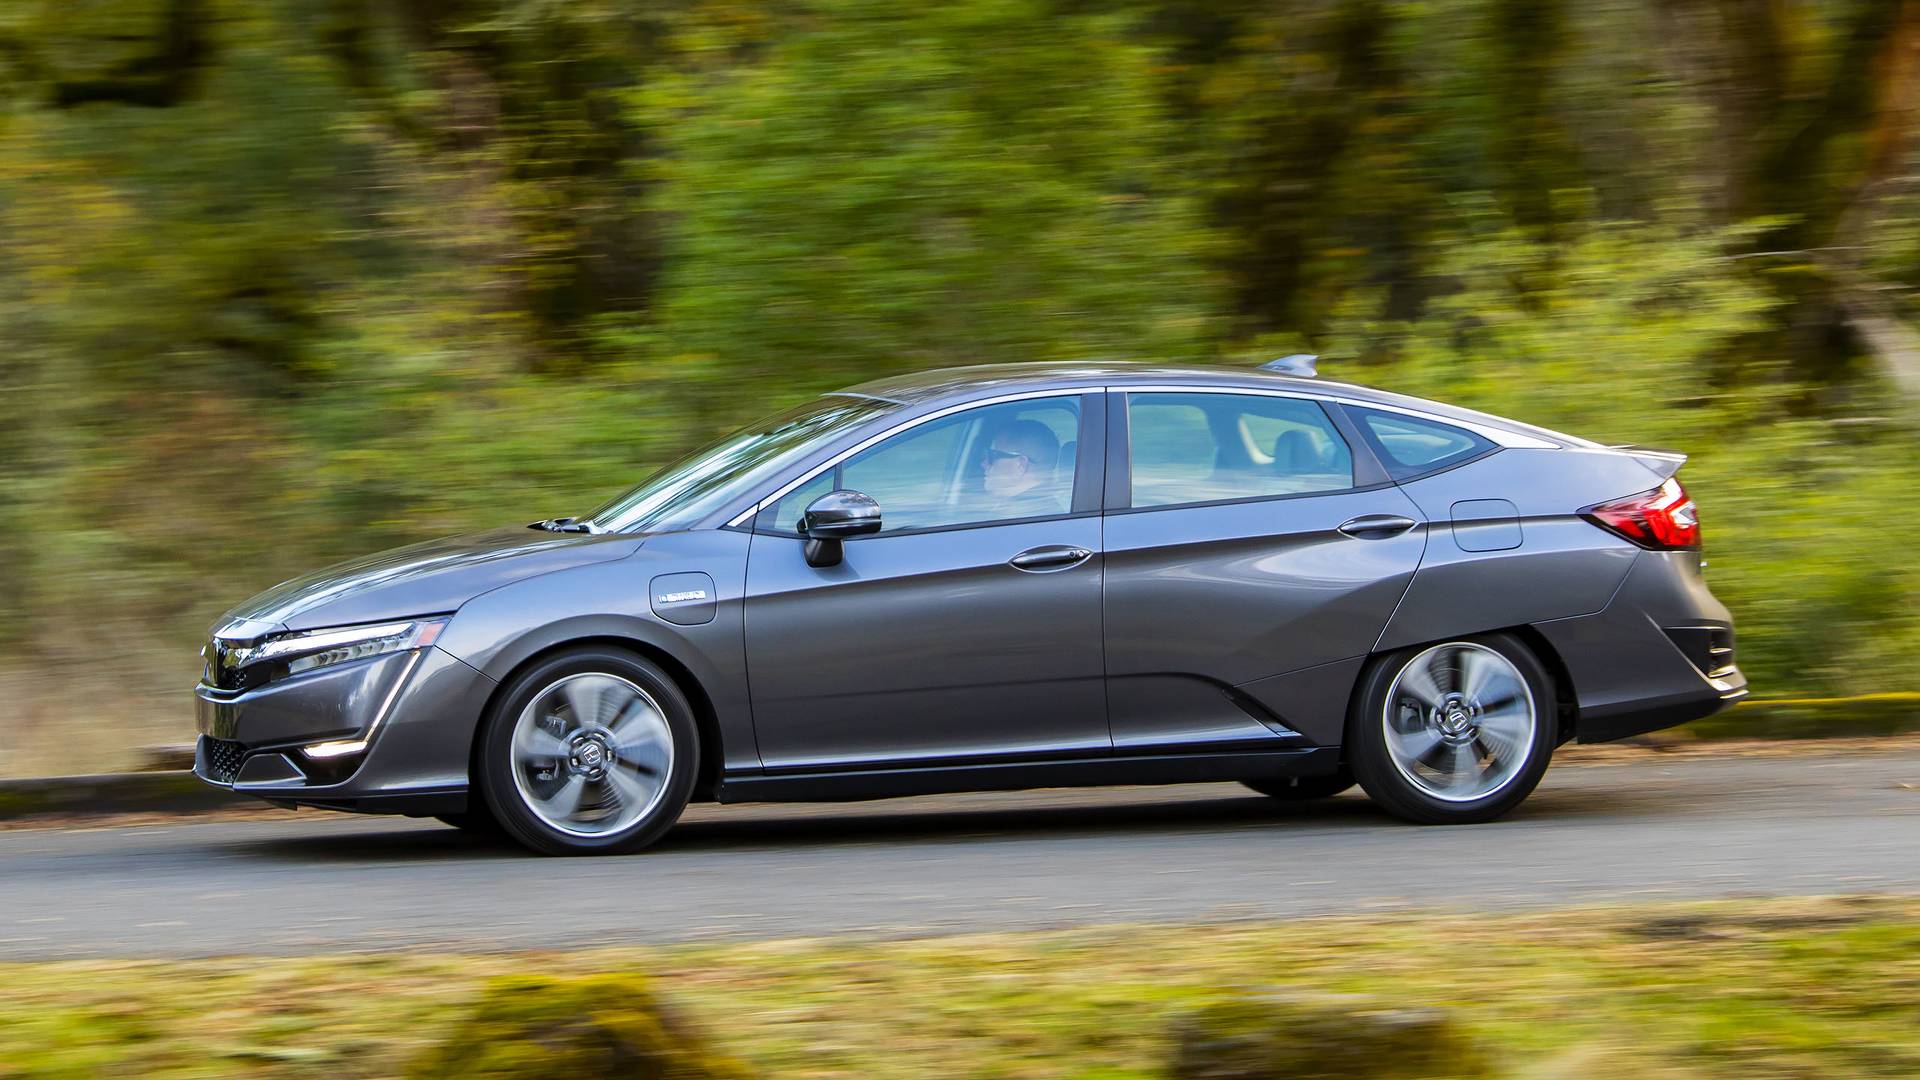 2018 Honda Clarity PHEV First Drive: Plugging Into The Mainstream